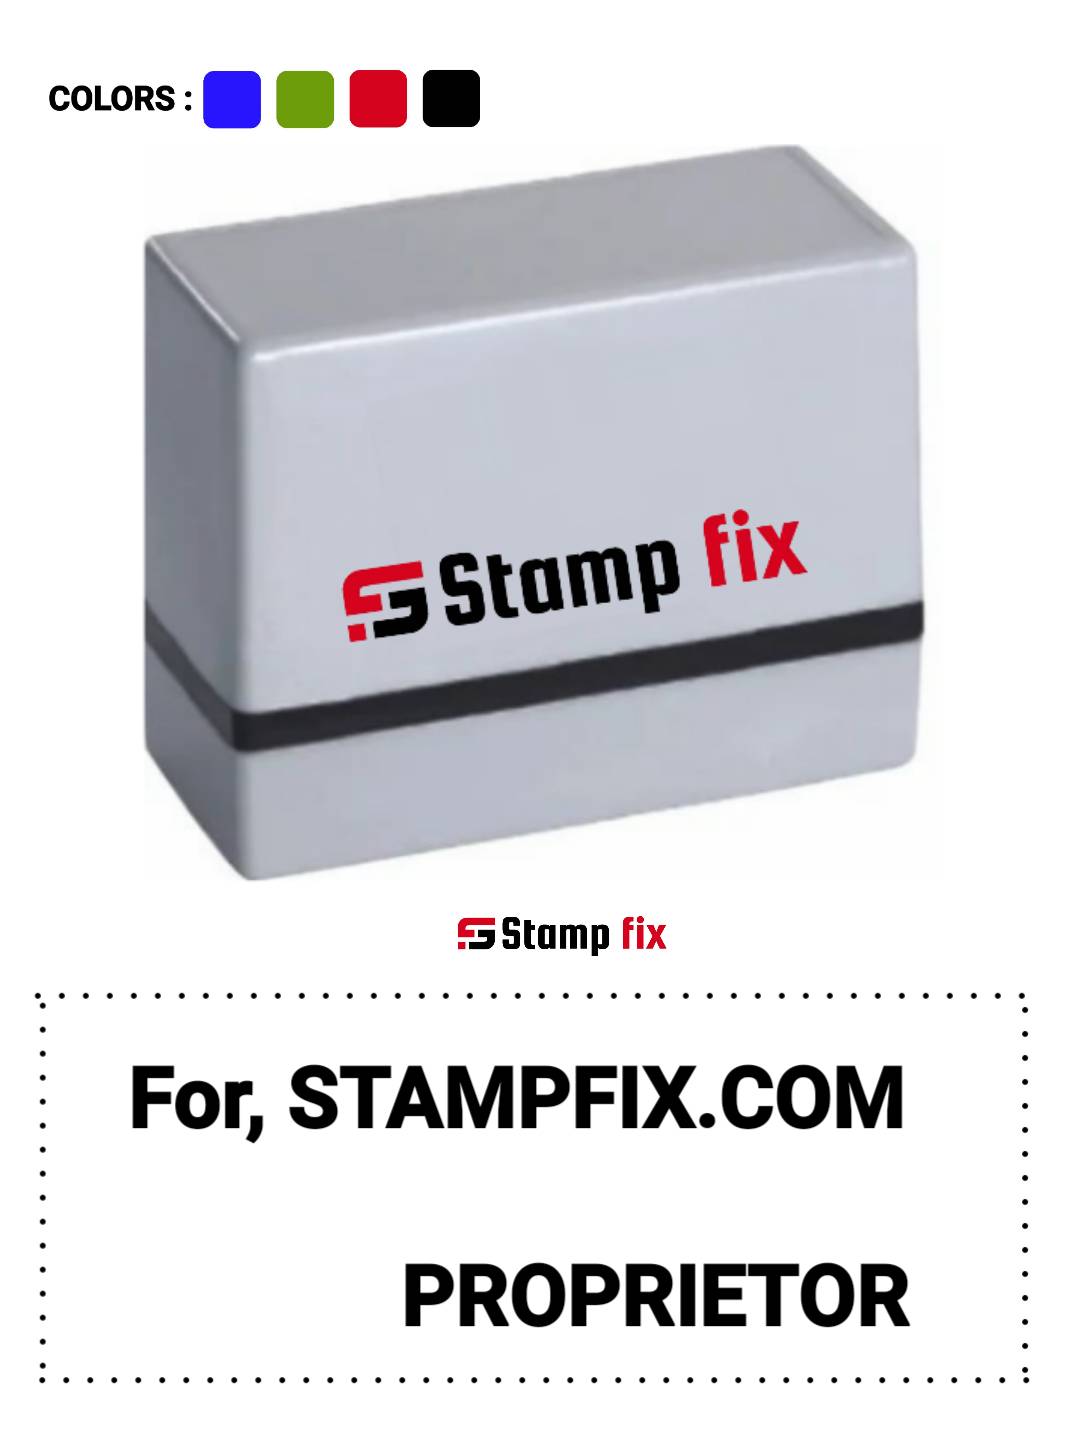 Pre Ink proprietor stamp, business stamp, retail stamp, owner stamp, director stamp, patner stamp , firm stamp, easy stamp, shop stamp, business marking stamp, Stamp by StampFix, a self-inking stamp with high-quality impressions
in India, nylon stamp, rubber stamp, pre ink stamp, polymer stamp, urgent stamp